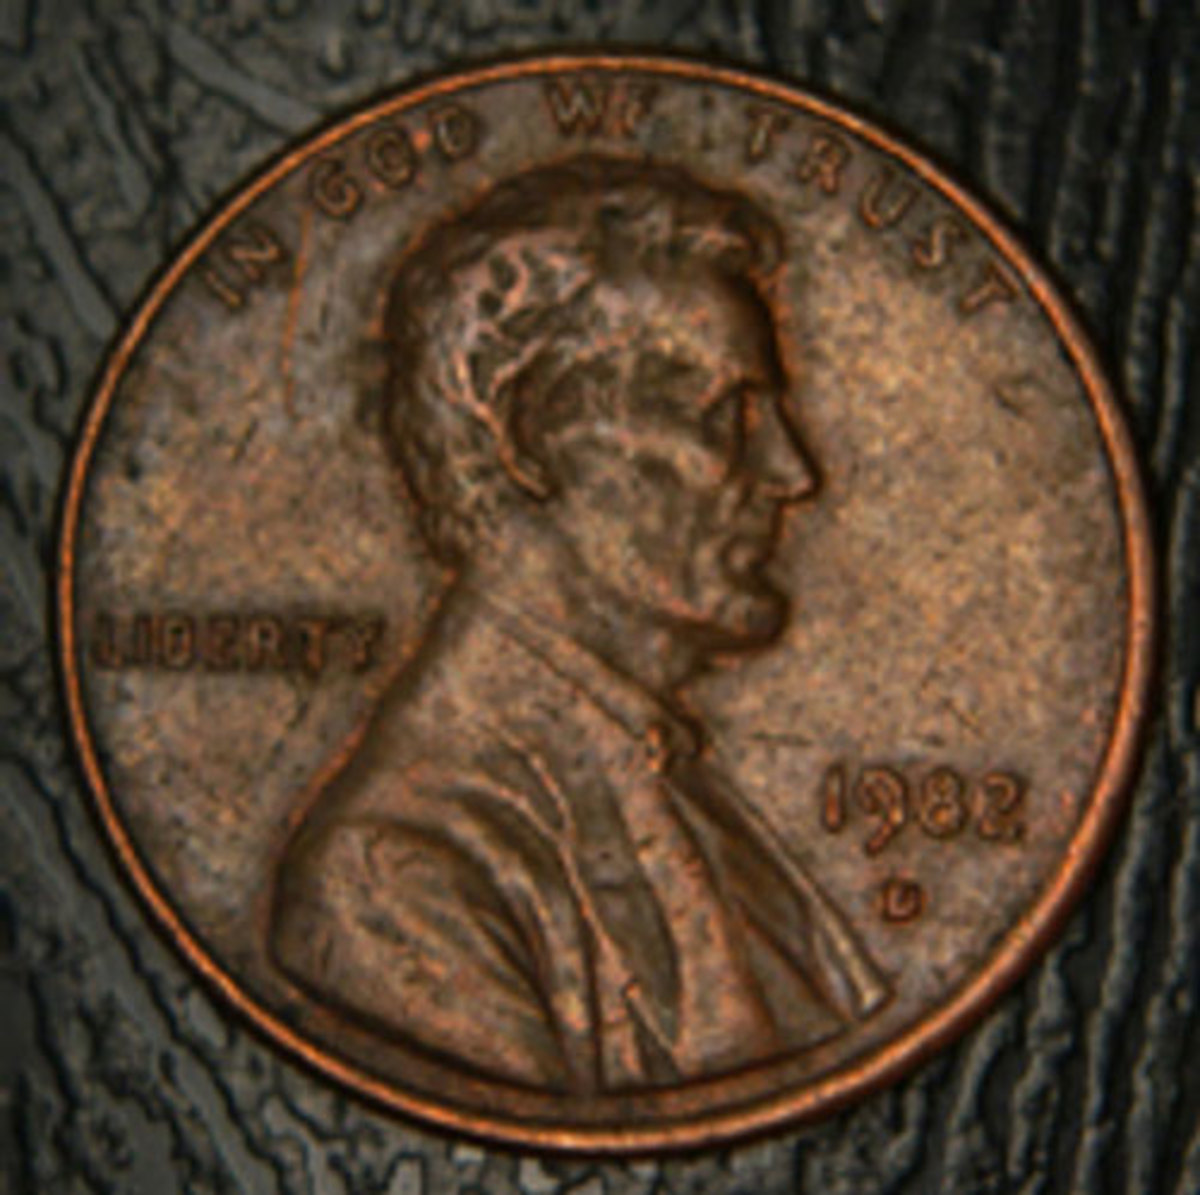 Newly found 1982-D Small date copper cent.